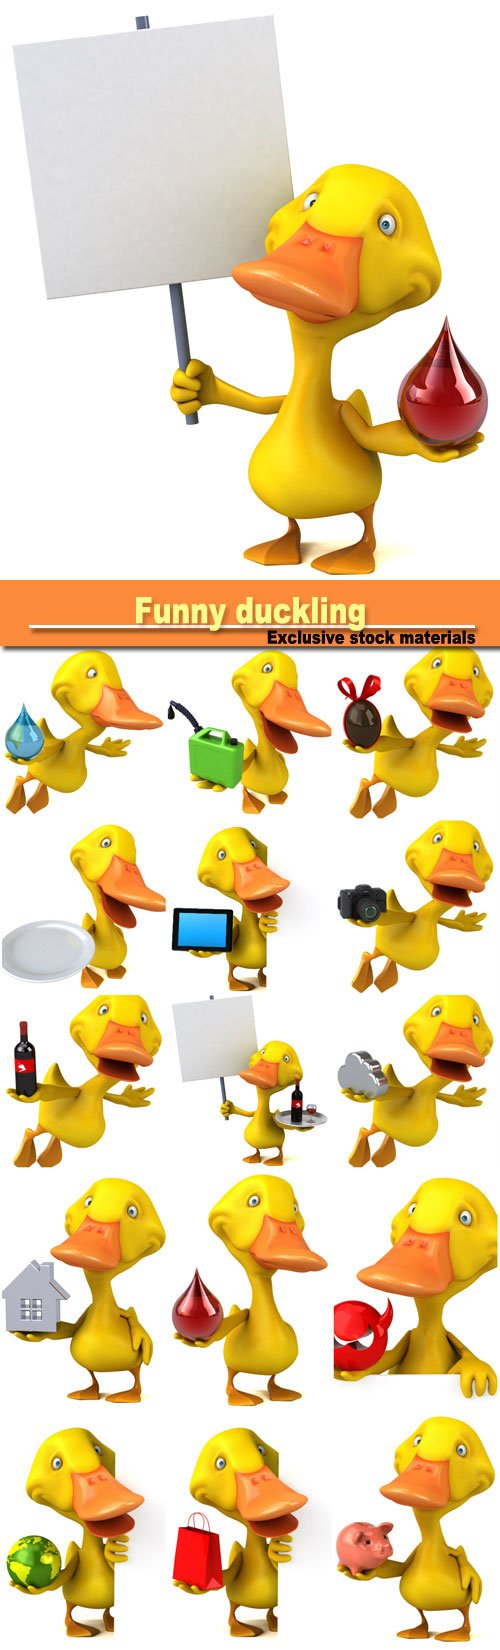 Funny duckling with different icons